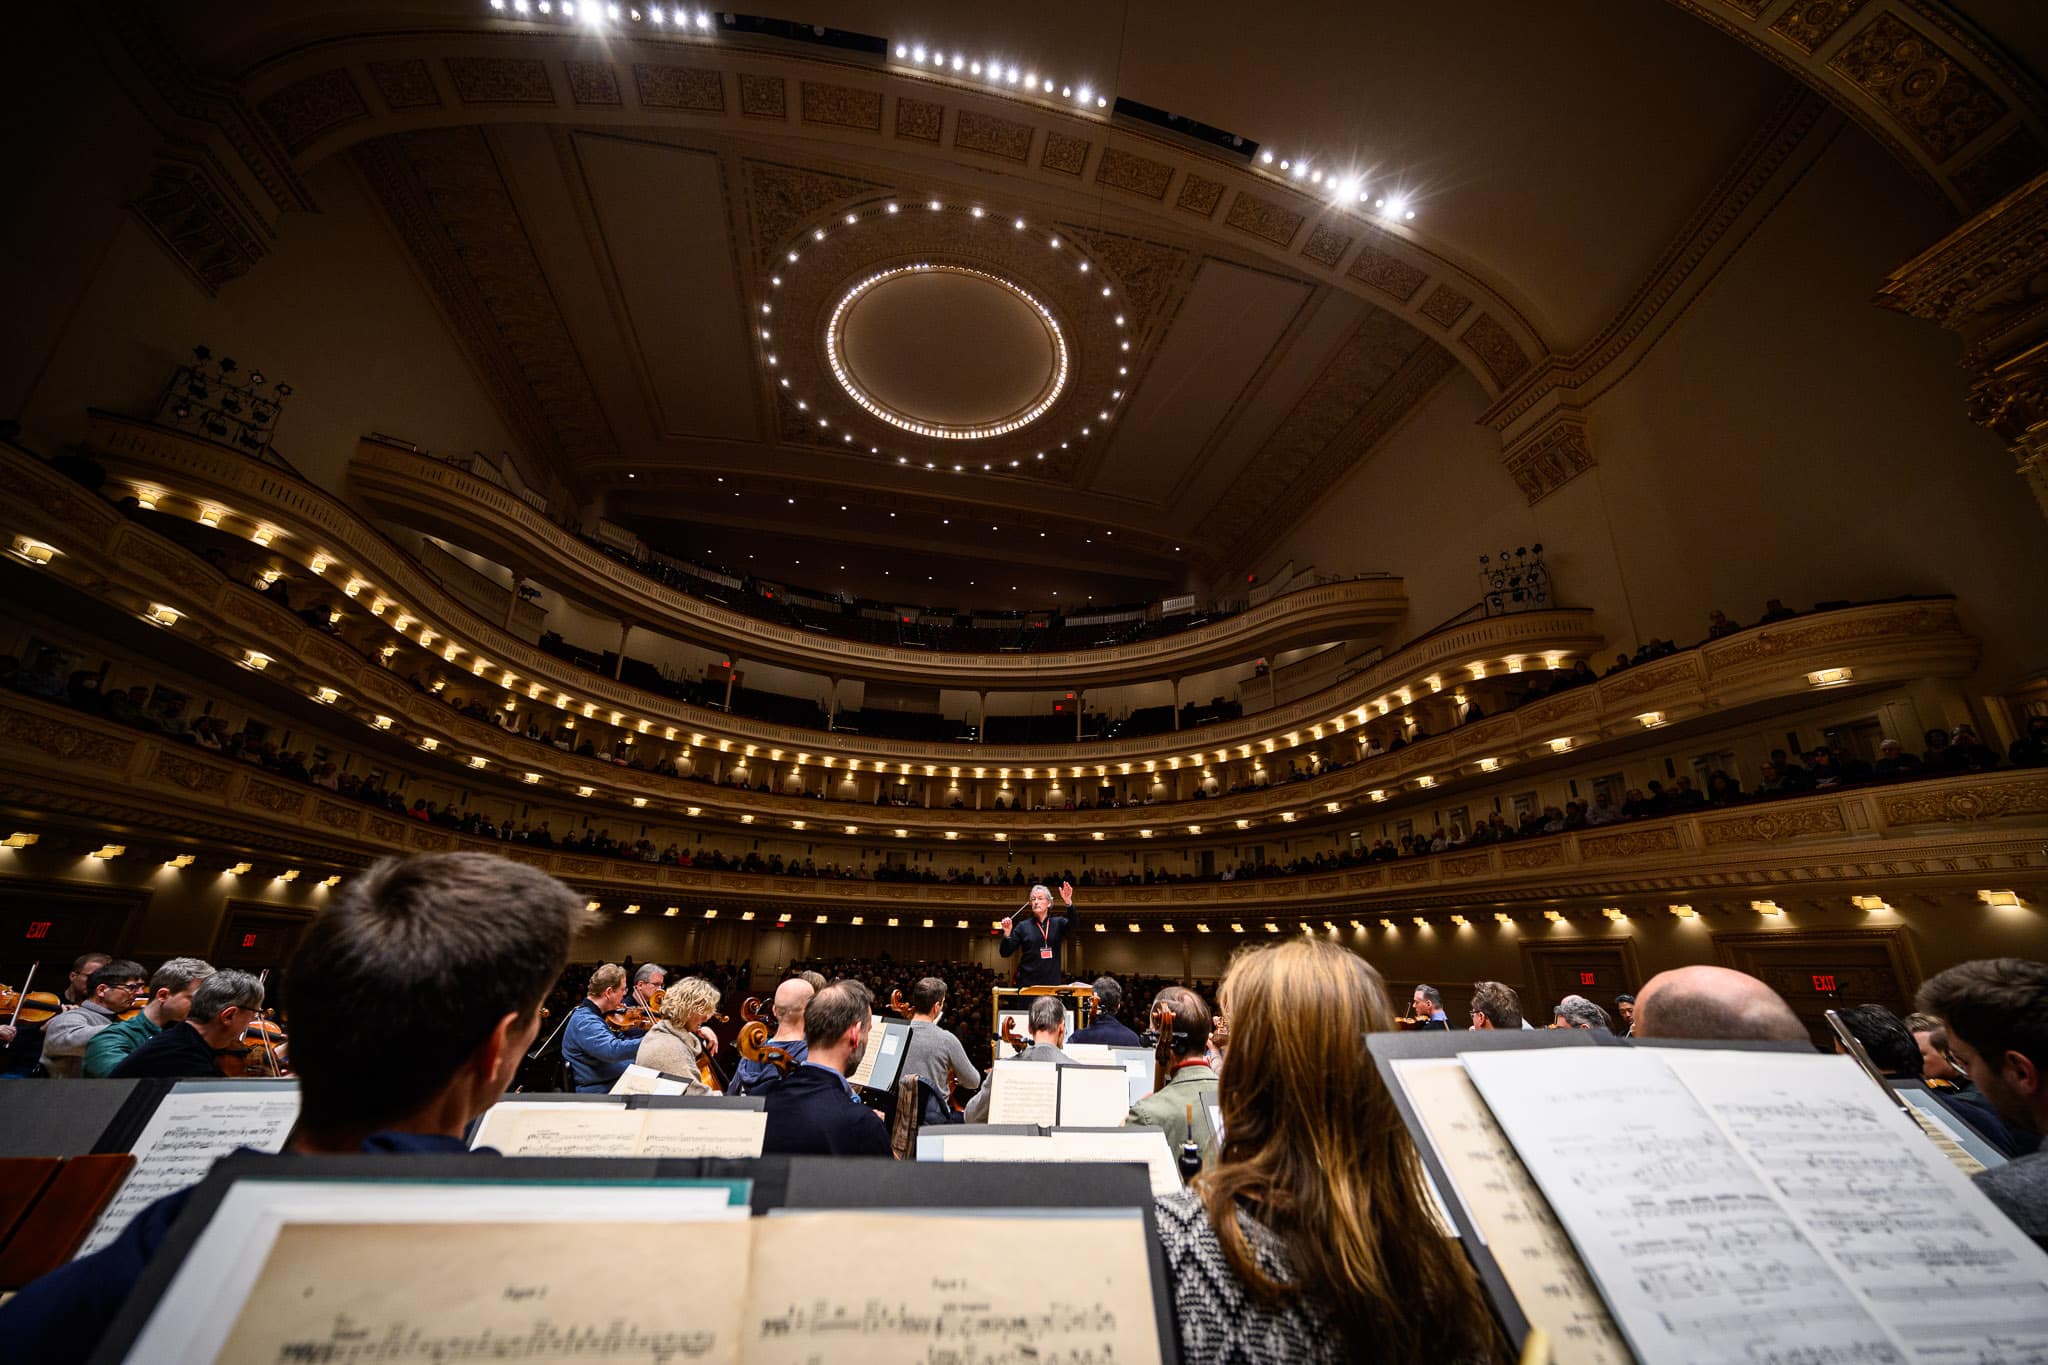 So how was the Vienna Phil at Carnegie Hall? Still the best?